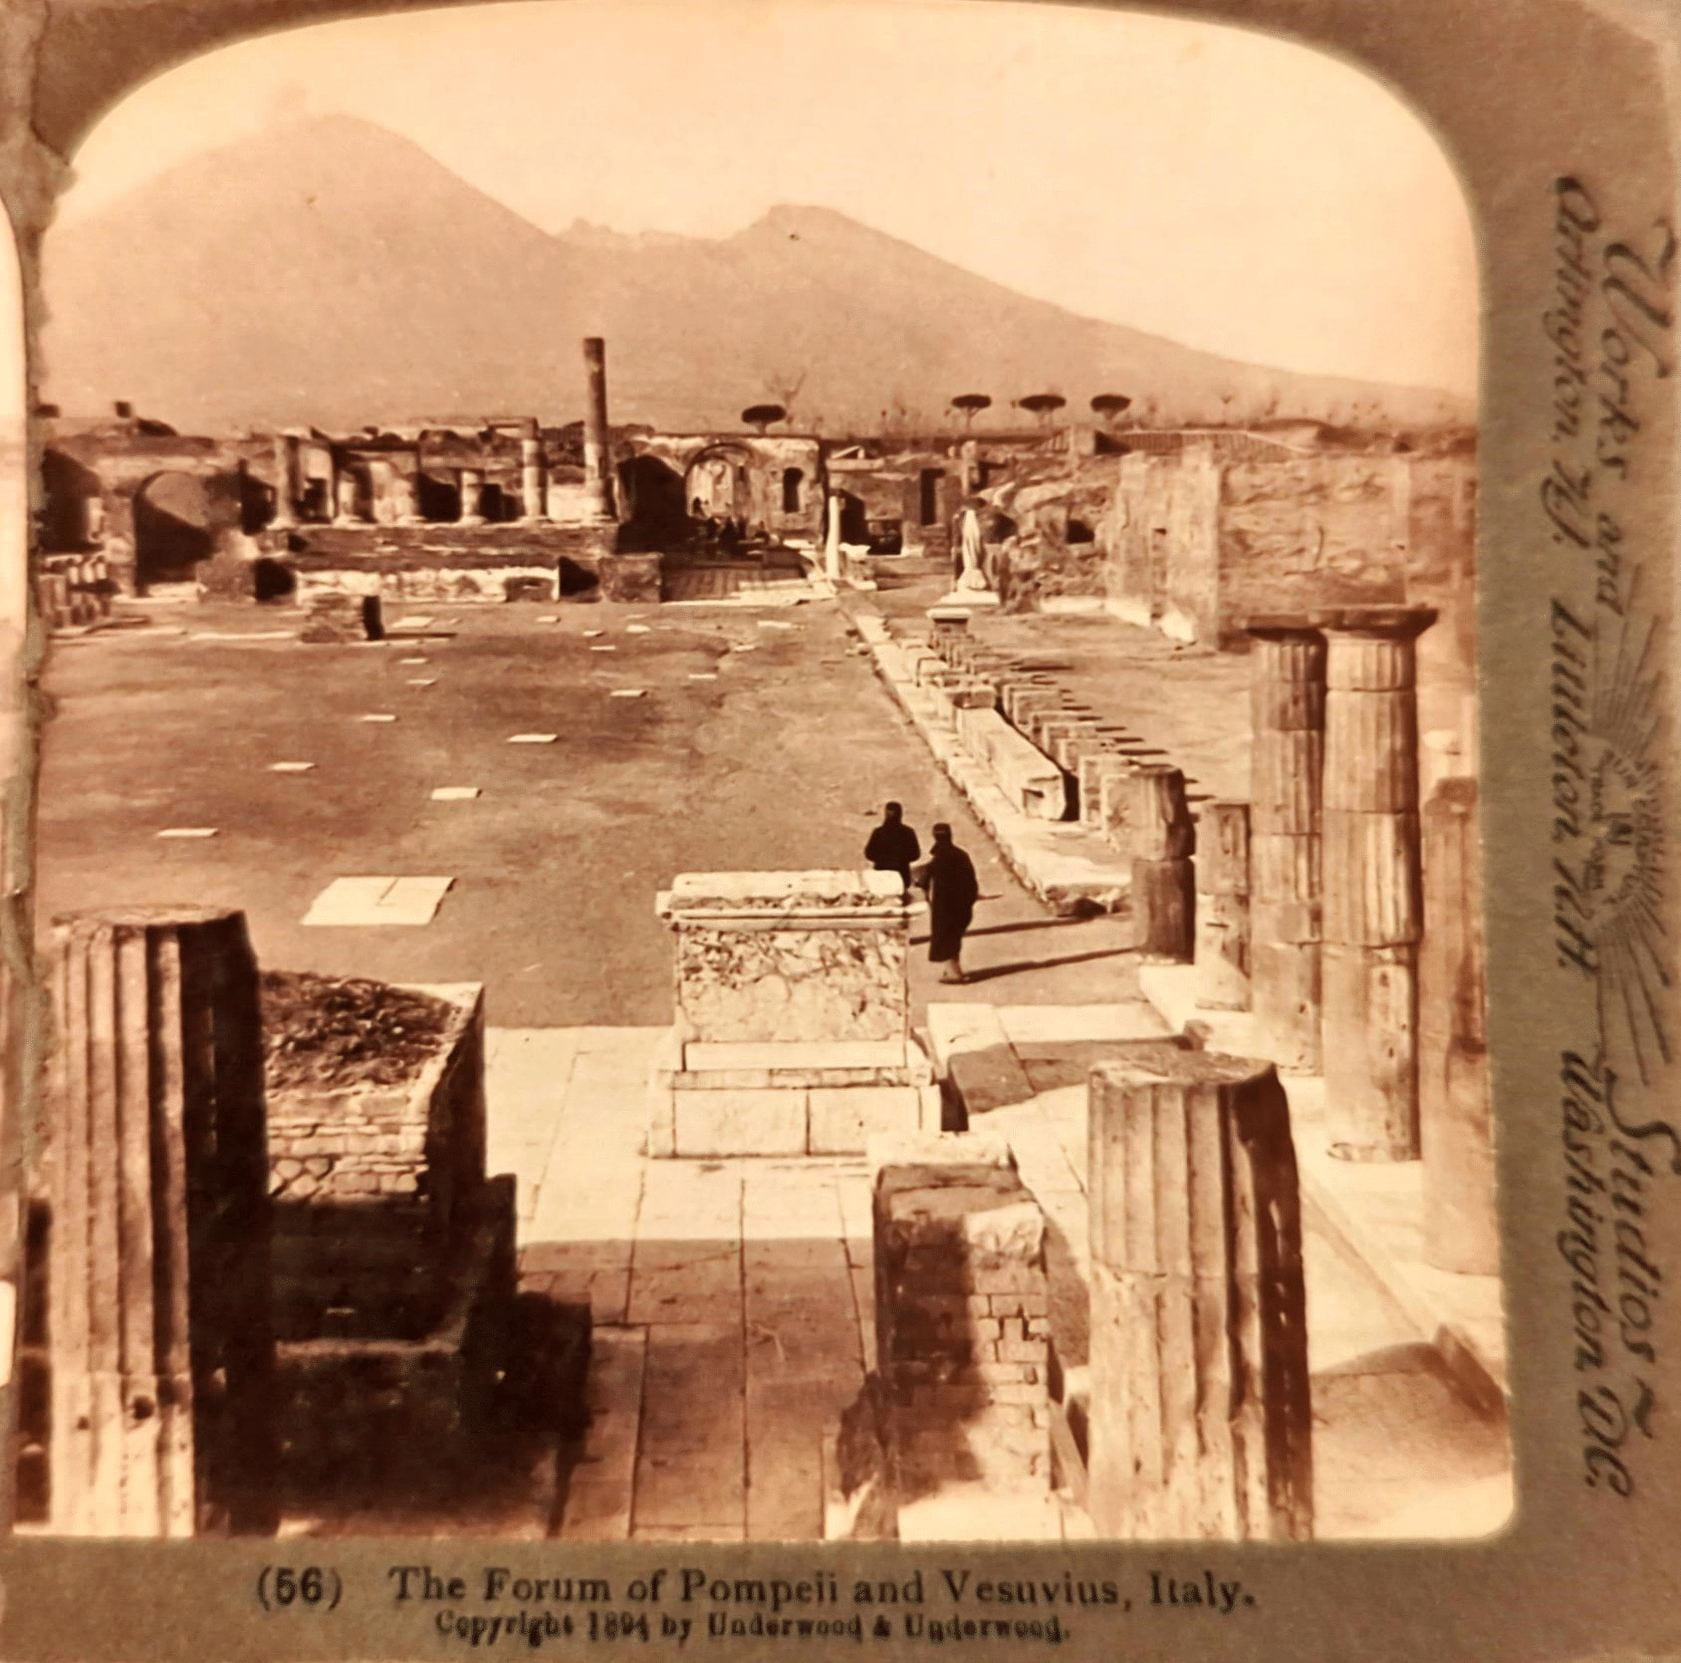 A black and white stereograph image of a historic site with building ruins. At the bottom it says "The Forum of Pompeii and Vesuvious, Italy."